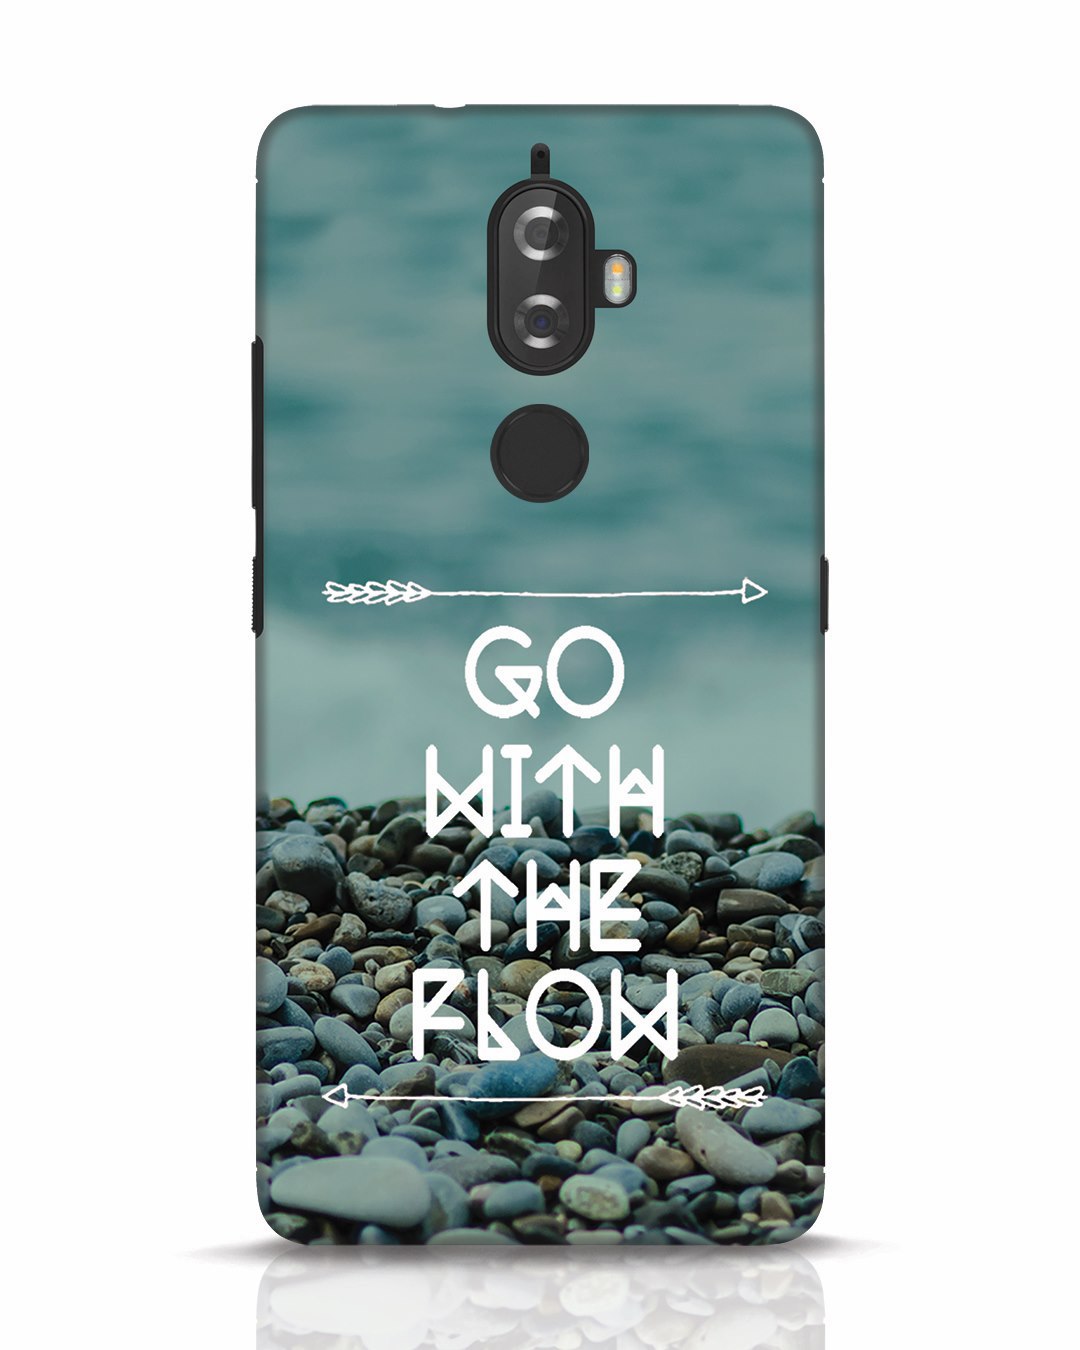 Go With The Flow Lenovo K8 Plus Mobile Cover Lenovo K8 Plus Mobile Covers Bewakoof.com